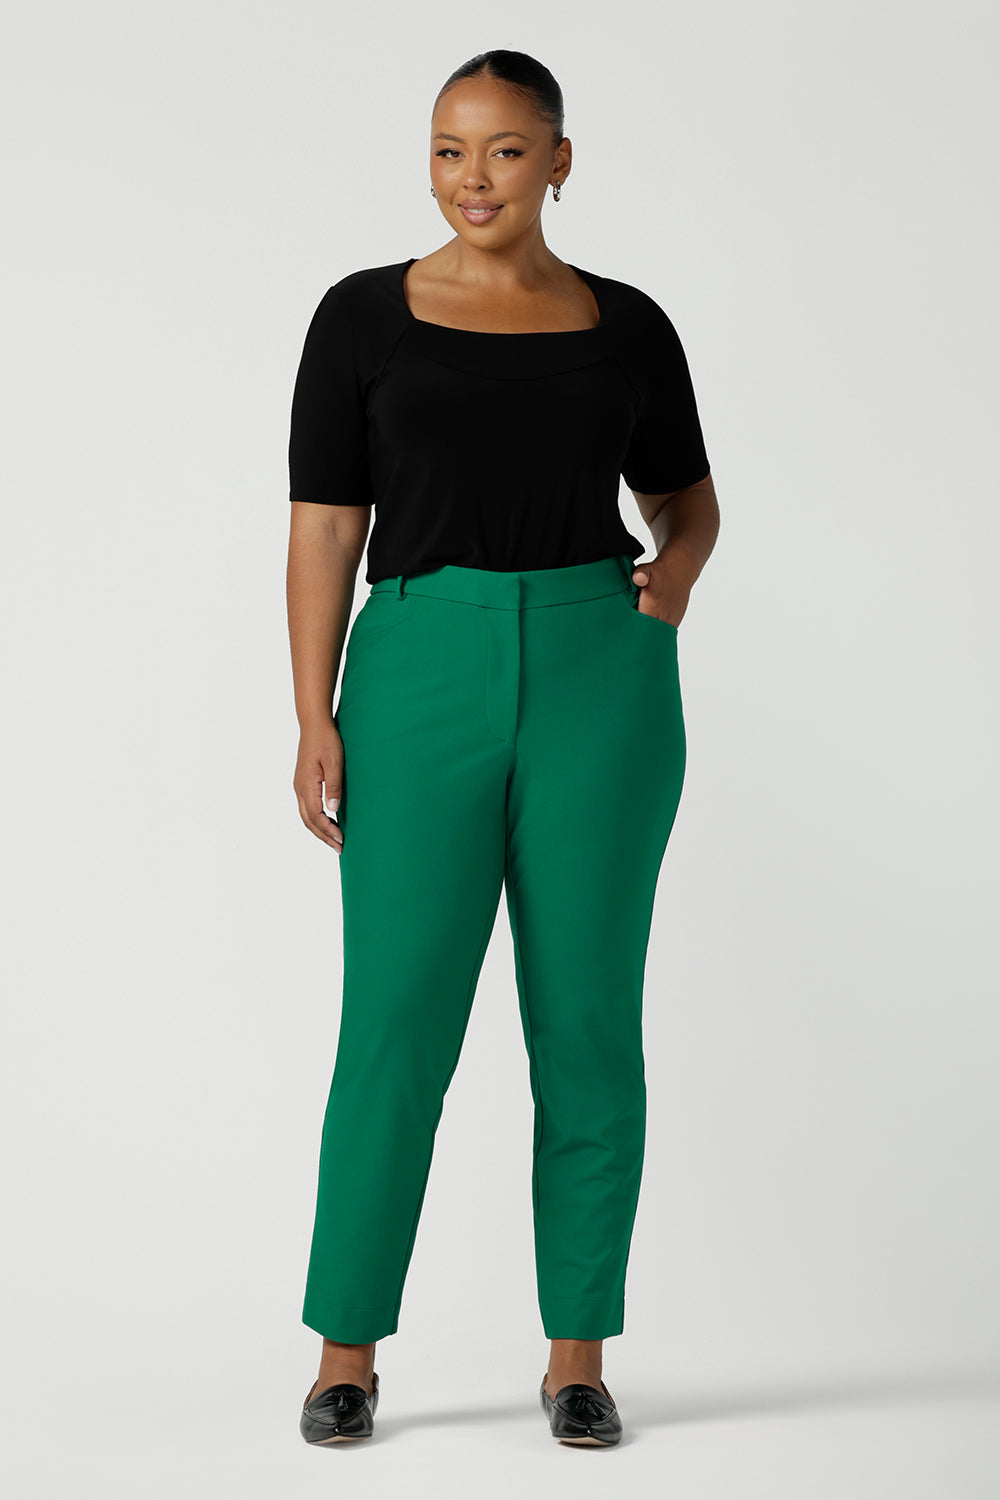 A curvy woman wears a plus size, short sleeve black top with square neckline. A slim fit top in classic black, it is worn with emerald green tapered, cigarette pants. This tailored jersey top wears well with workwear separates for an office look and also as a smart casual top. Shop tops in petite, mid size and plus size online at Australian women's clothing brand, Leina & Fleur.